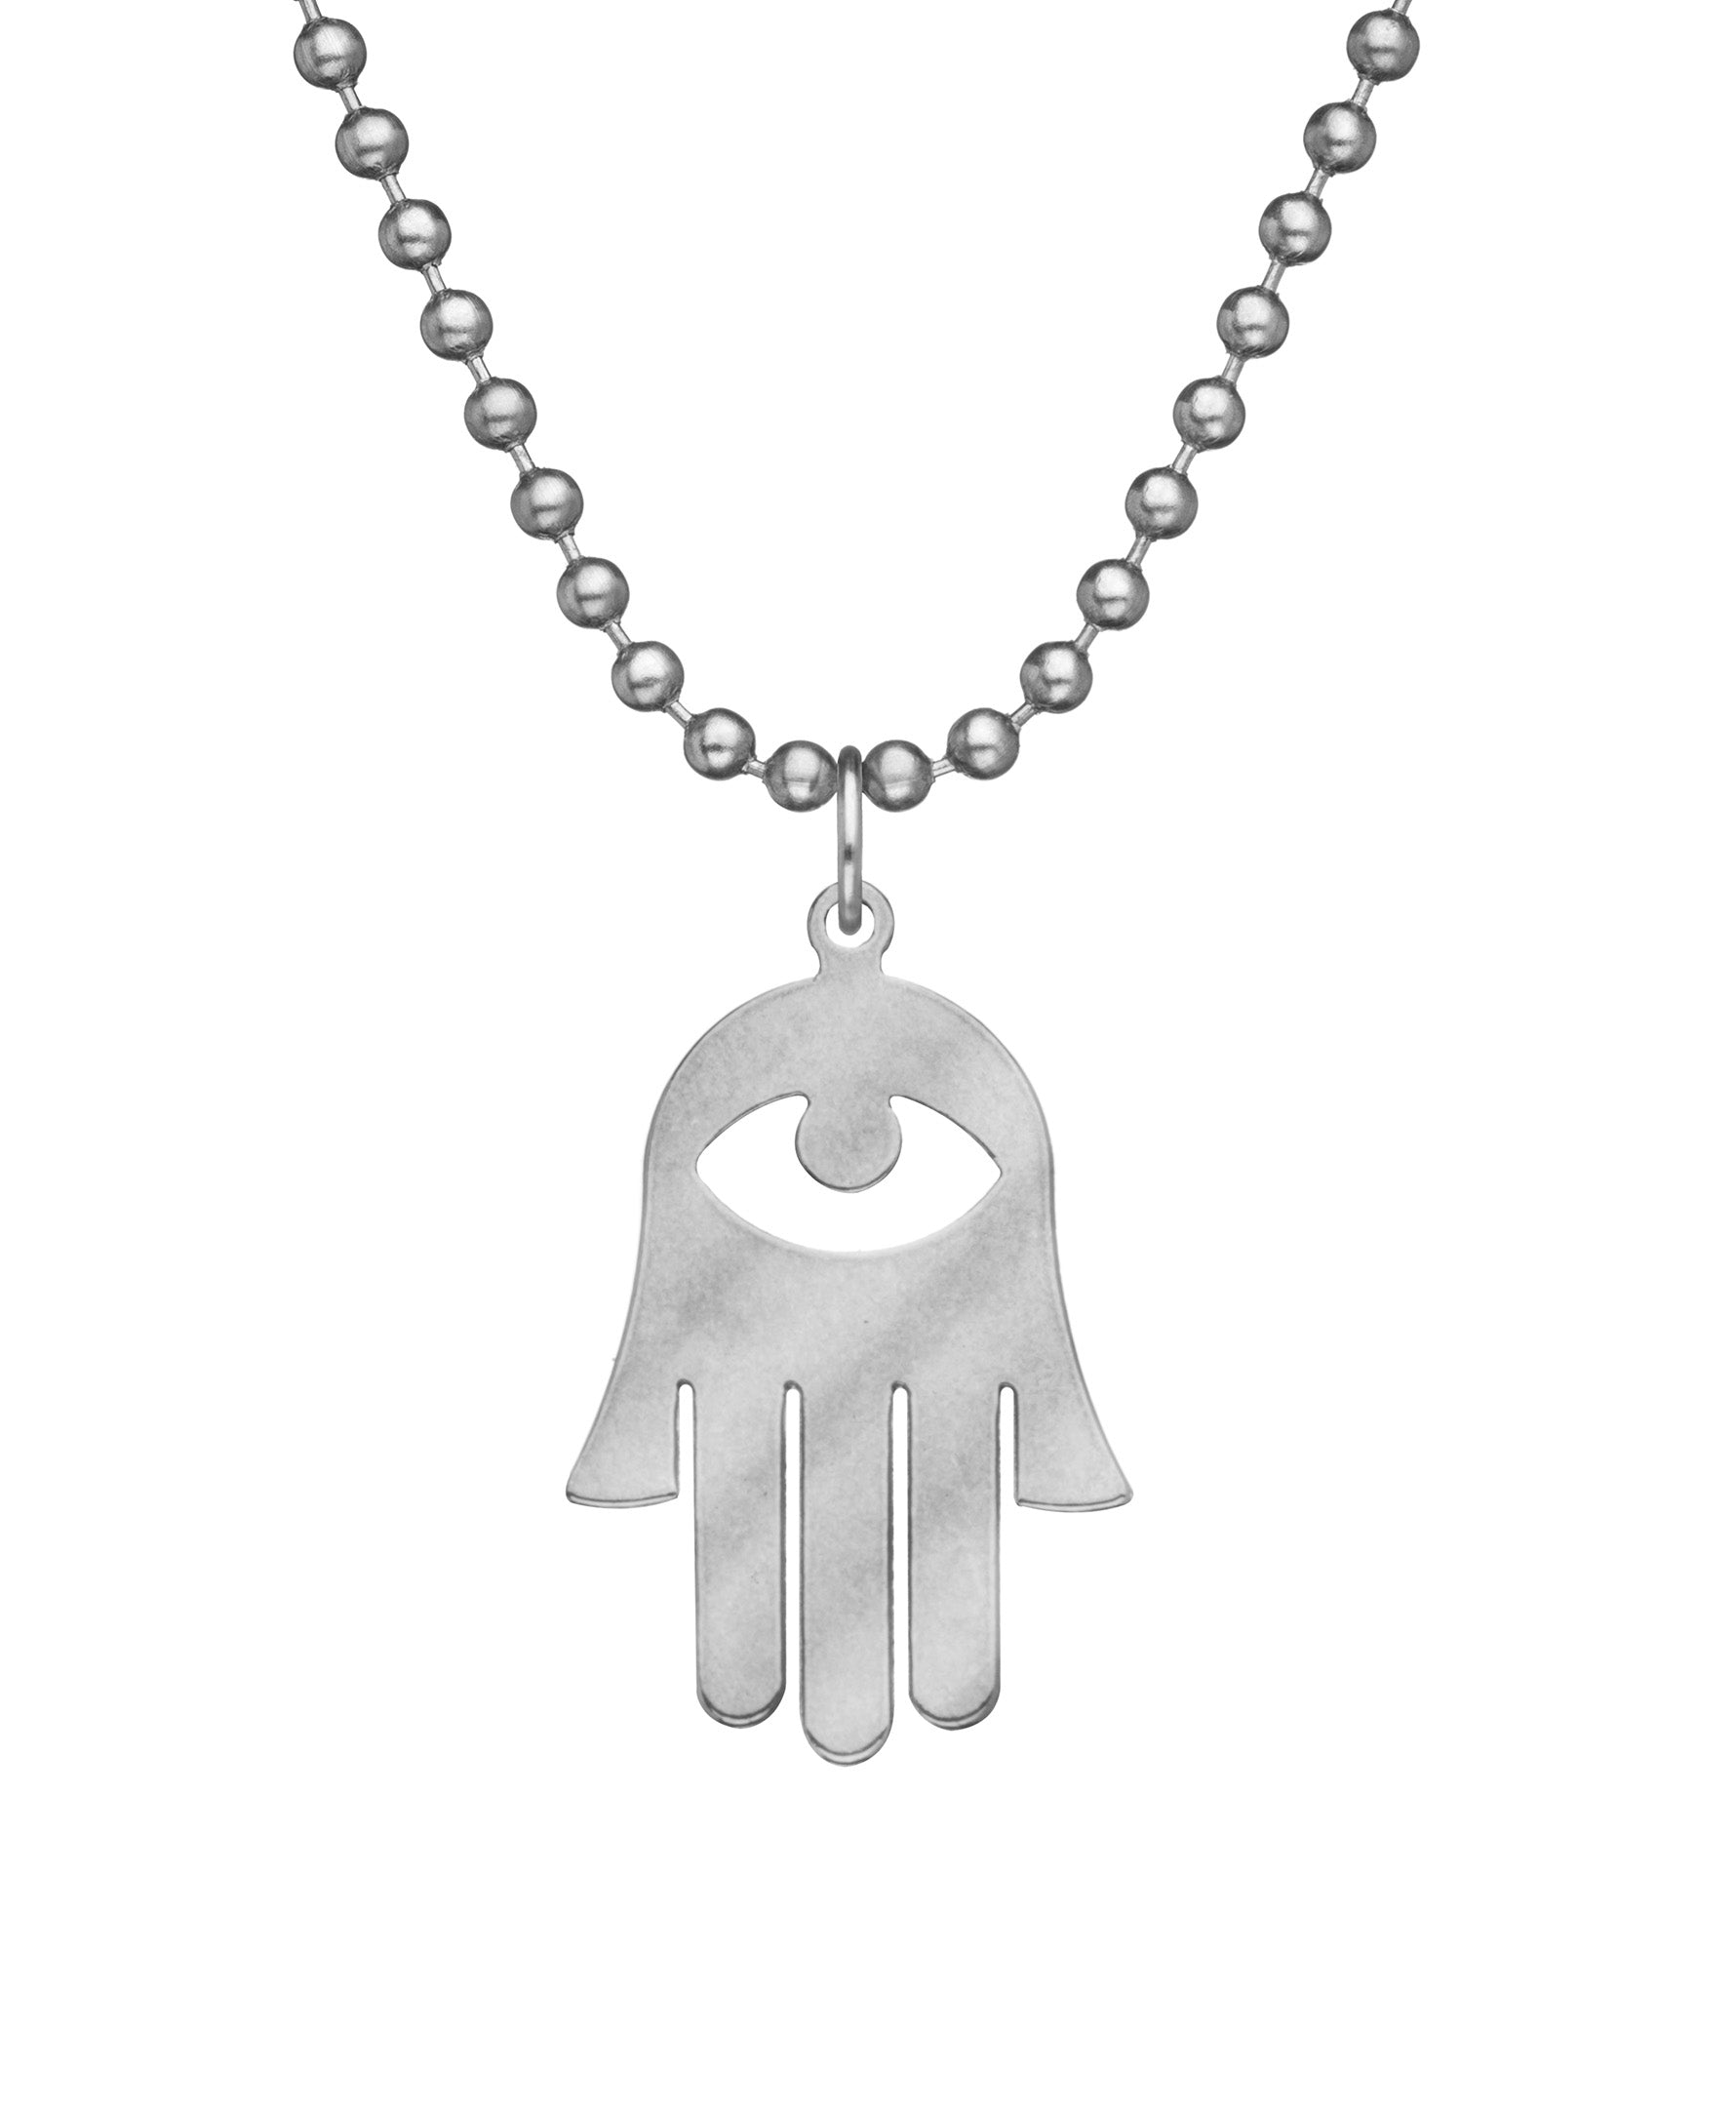 Genuine U.S. Military Issue HAMSA Necklace with Dog Tag Chain